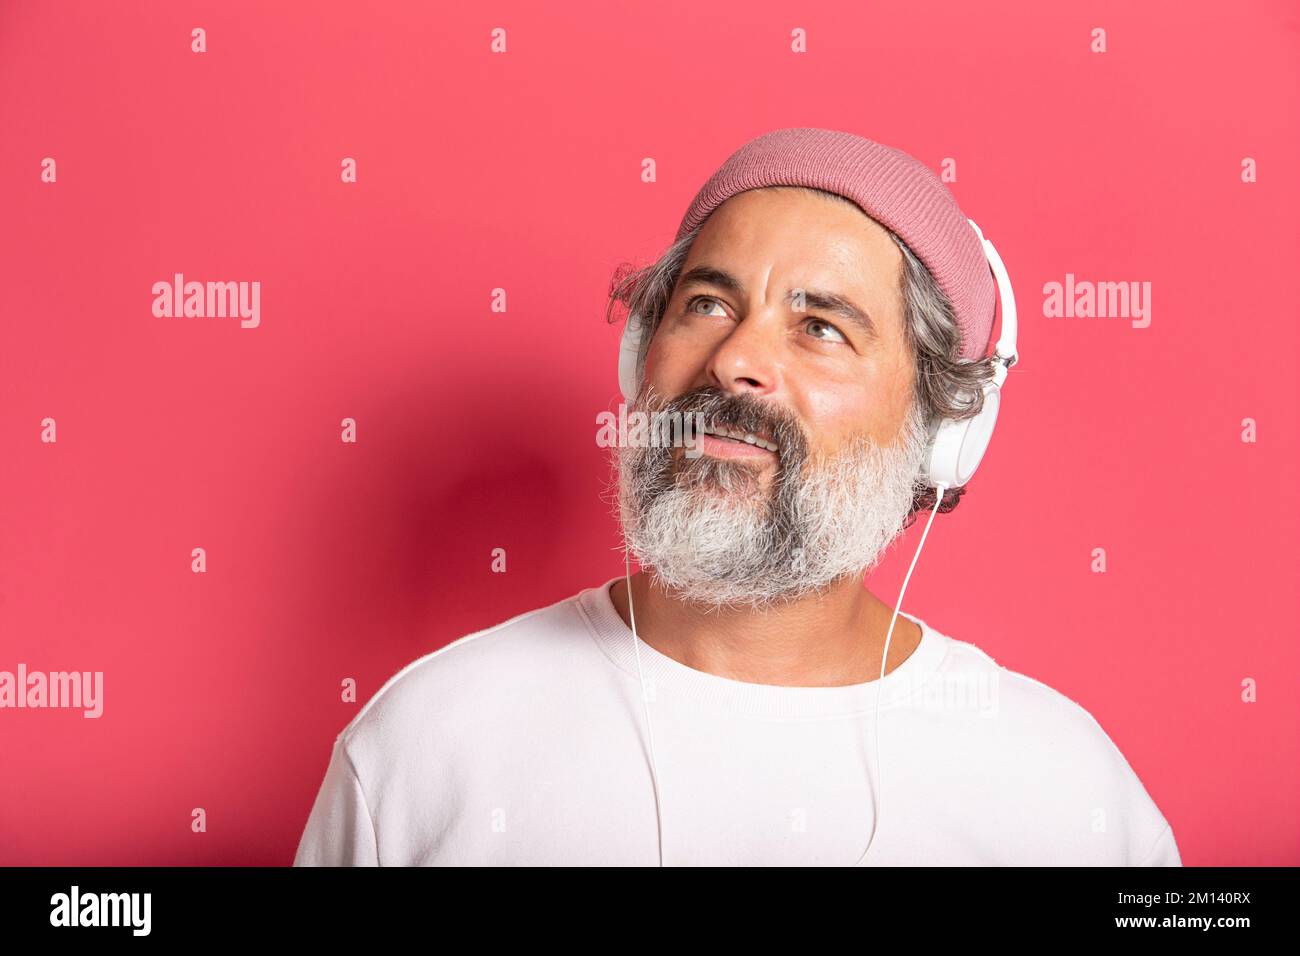 A Caucasian Cheerful gray-haired bearded man in casual pink hat and pullover listening to music with headphones isolated on fuchsia wall background Stock Photo